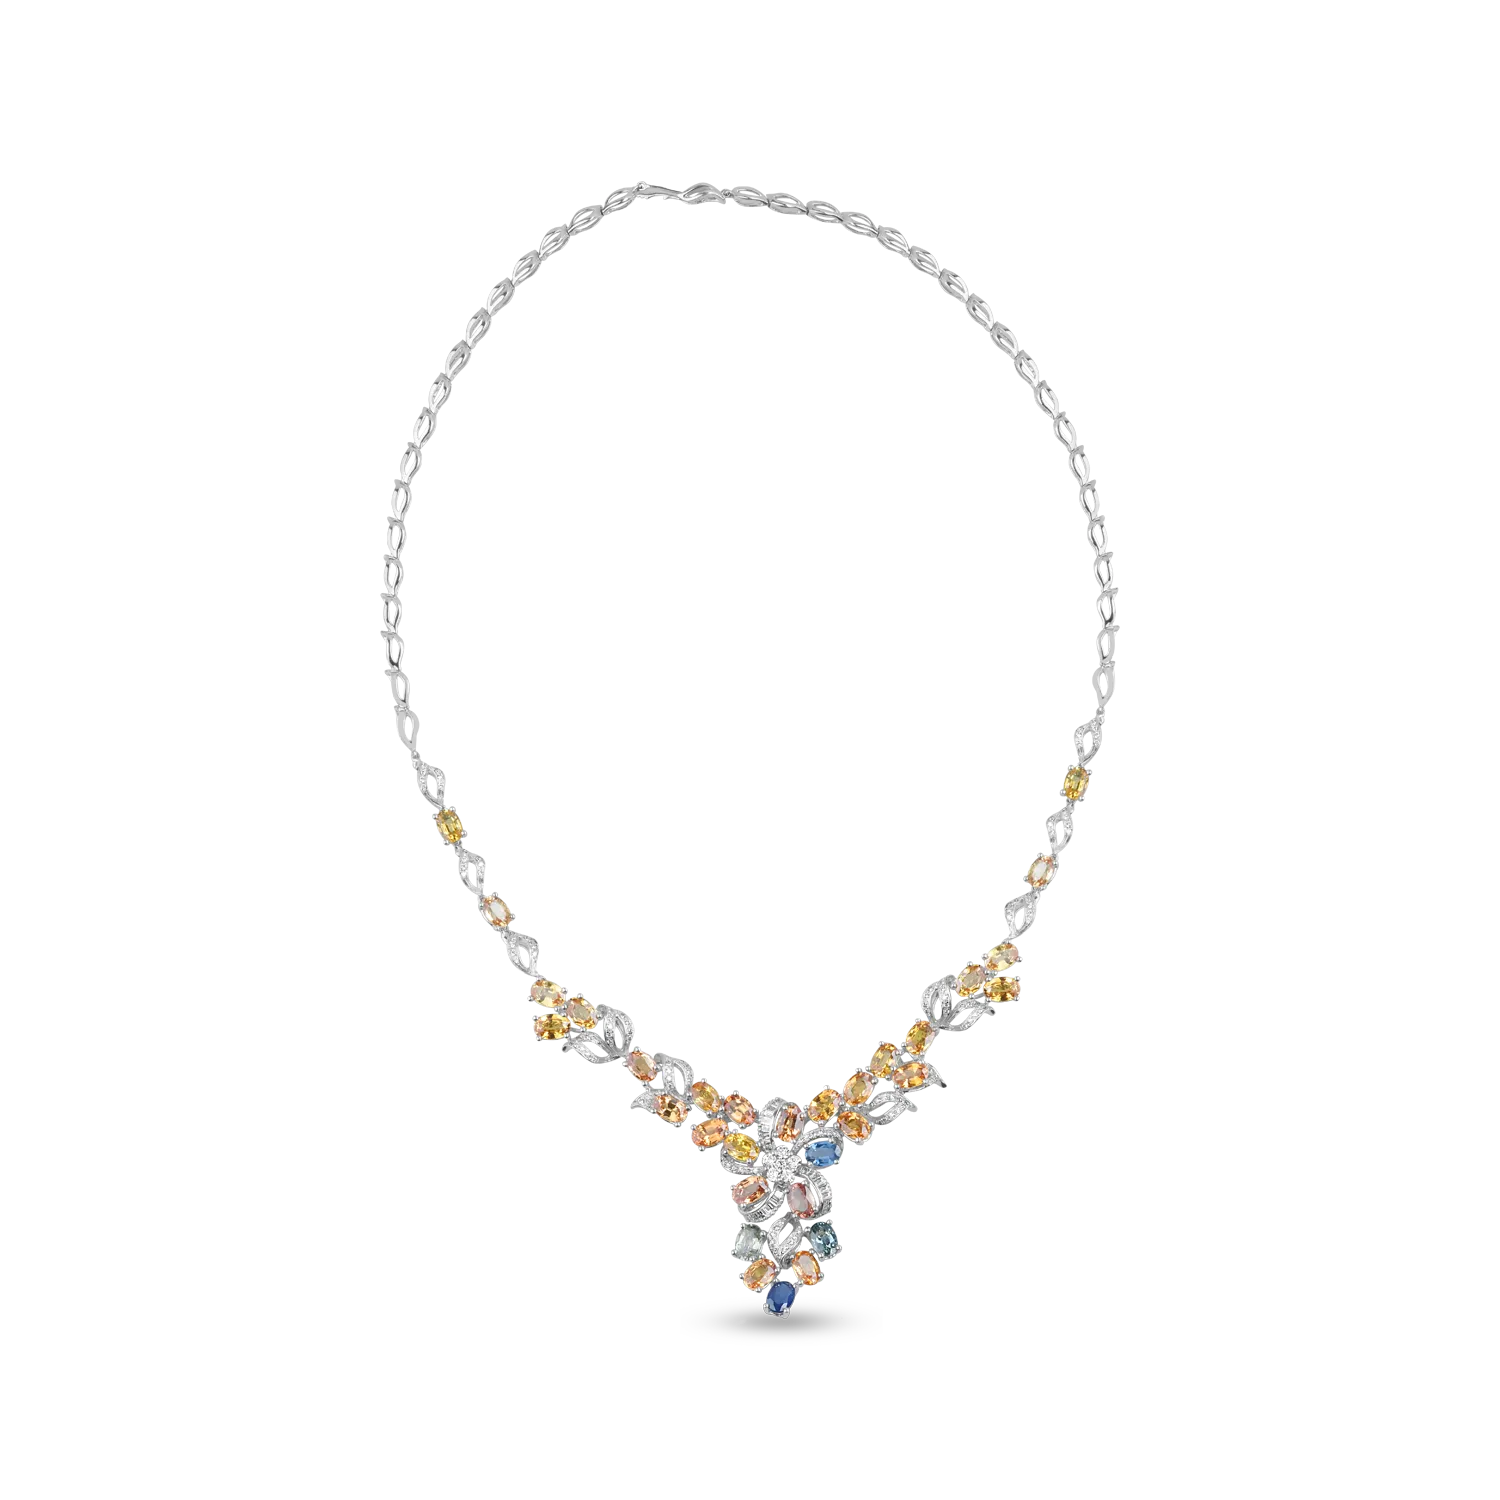 14K white gold pendant chain with 20.72ct multicolored sapphires and 1,236ct diamonds